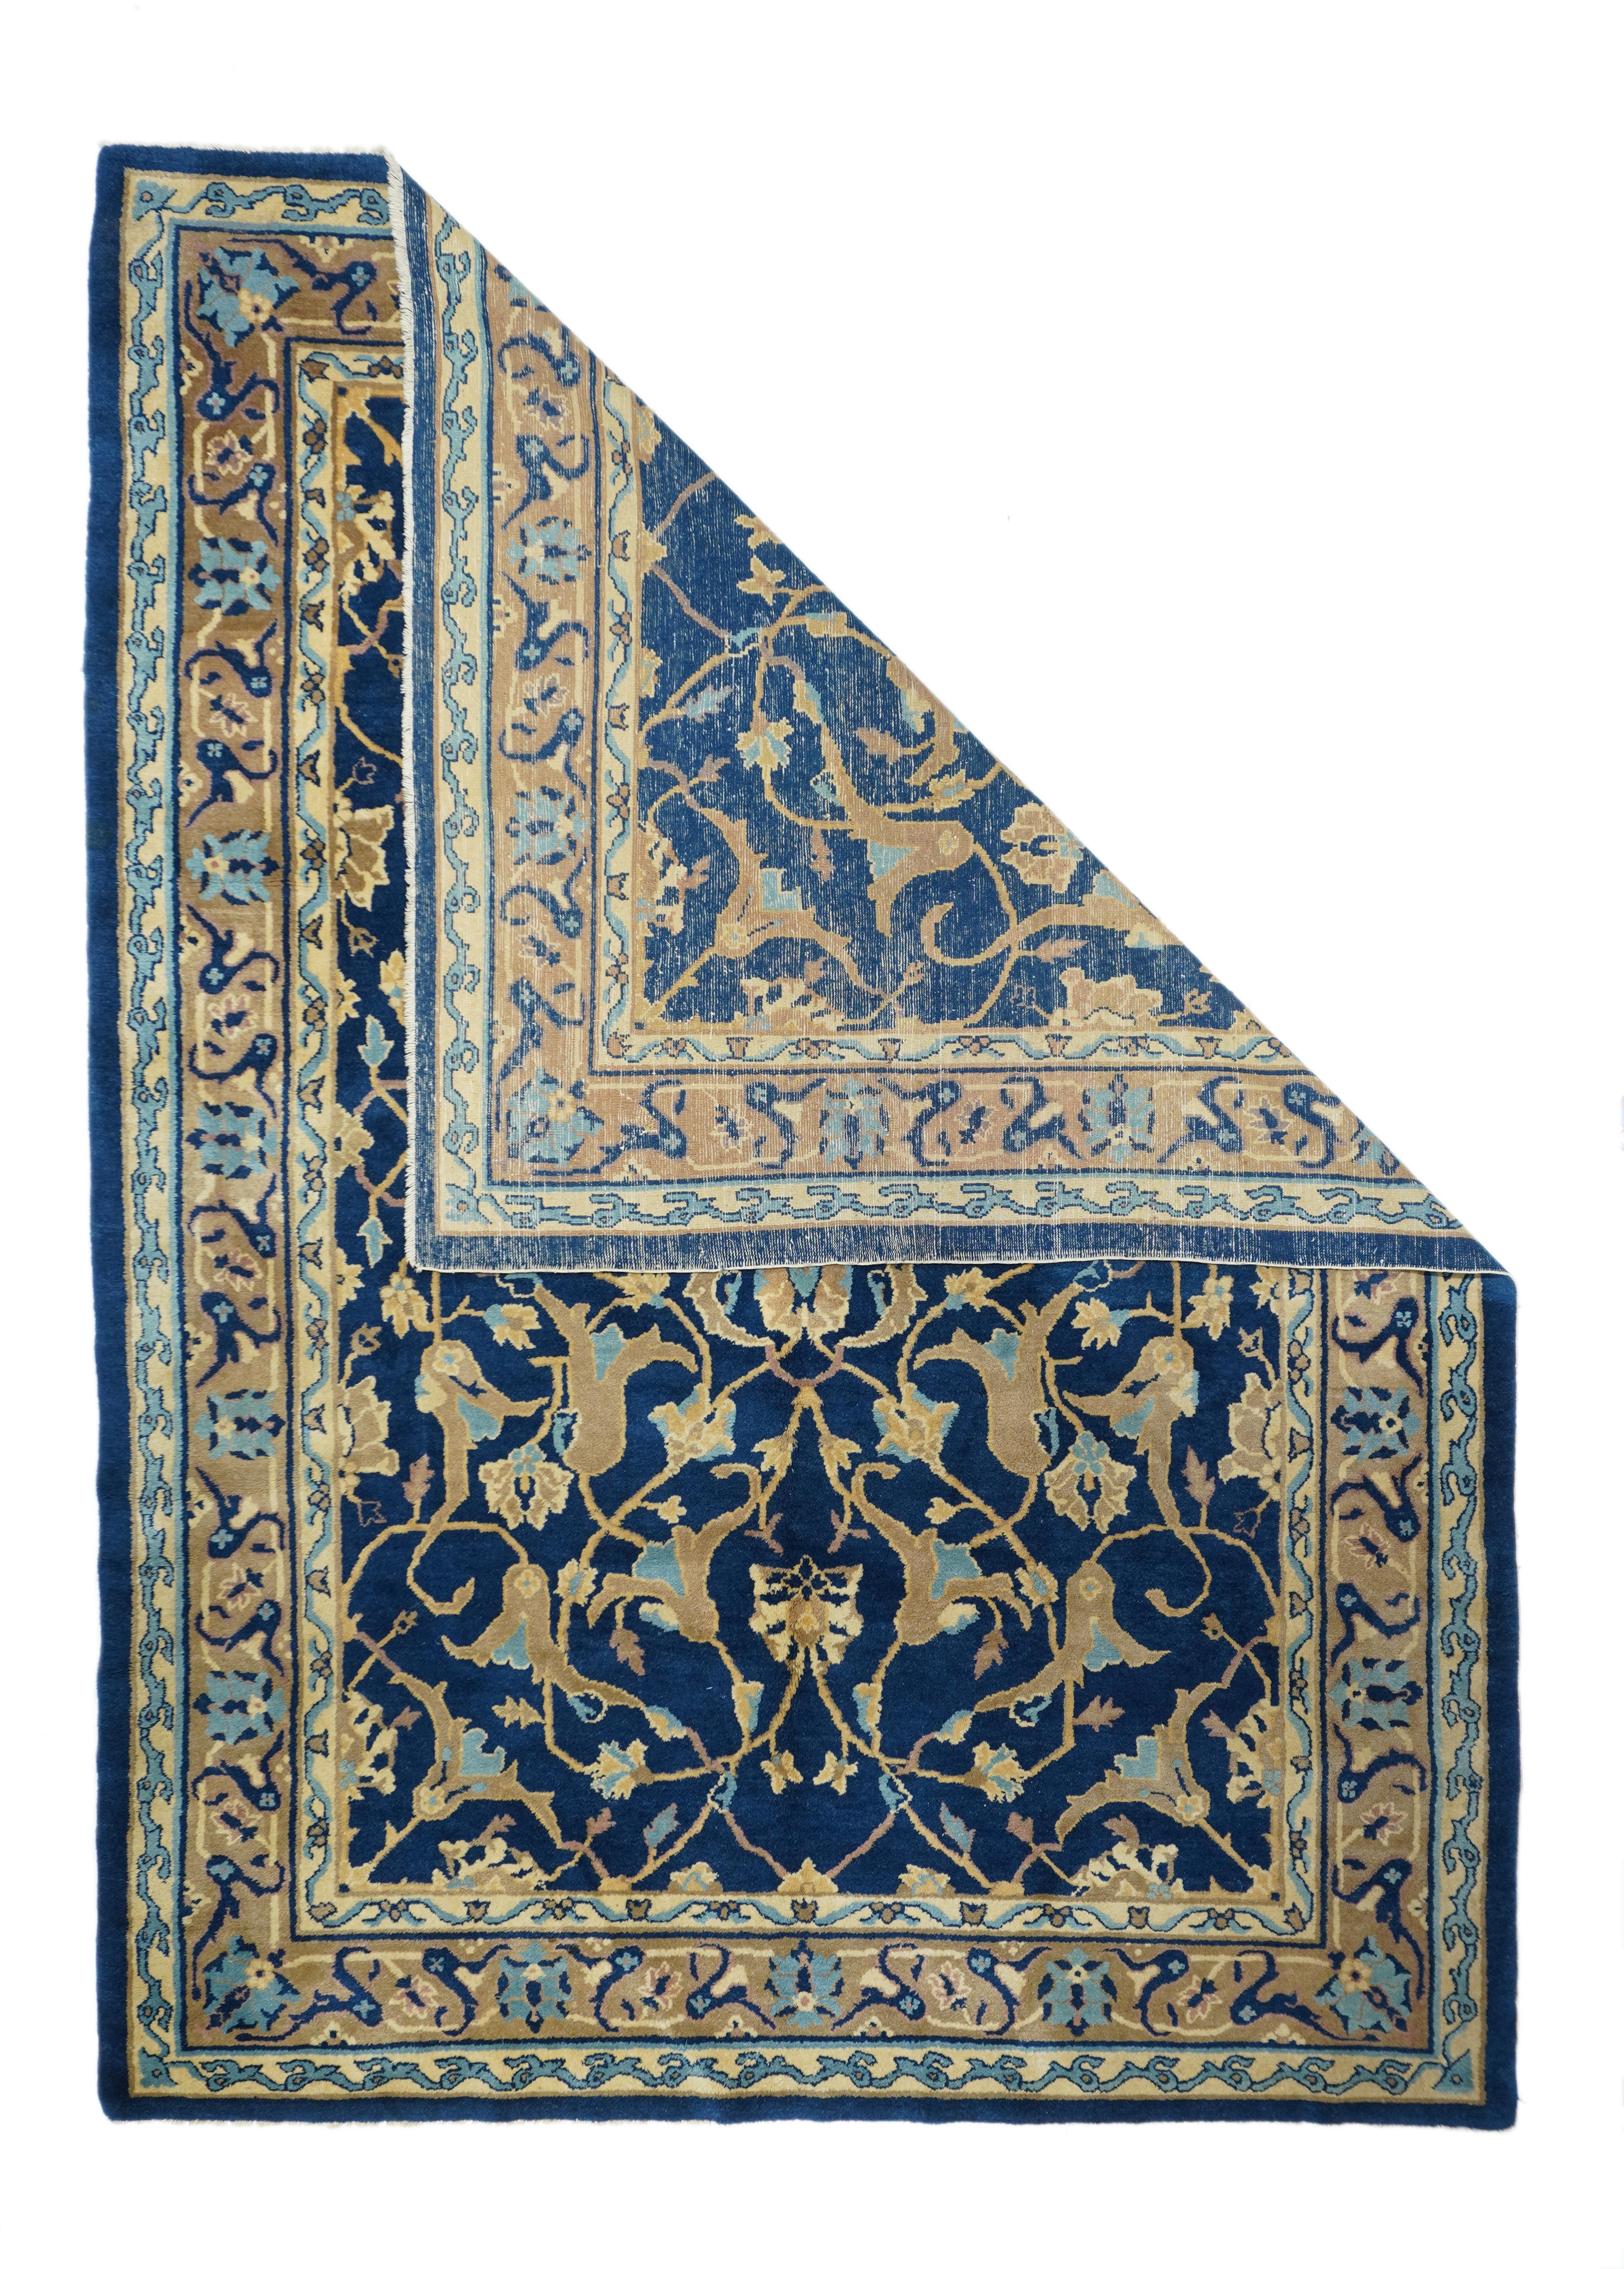 From the short Post-WWI period when Chinese weavers copied Persian pieces which were then in short supply. The dark blue field displays a two level arabesque and forked leaf pattern around a central four palmette motif. Rose-coral border with